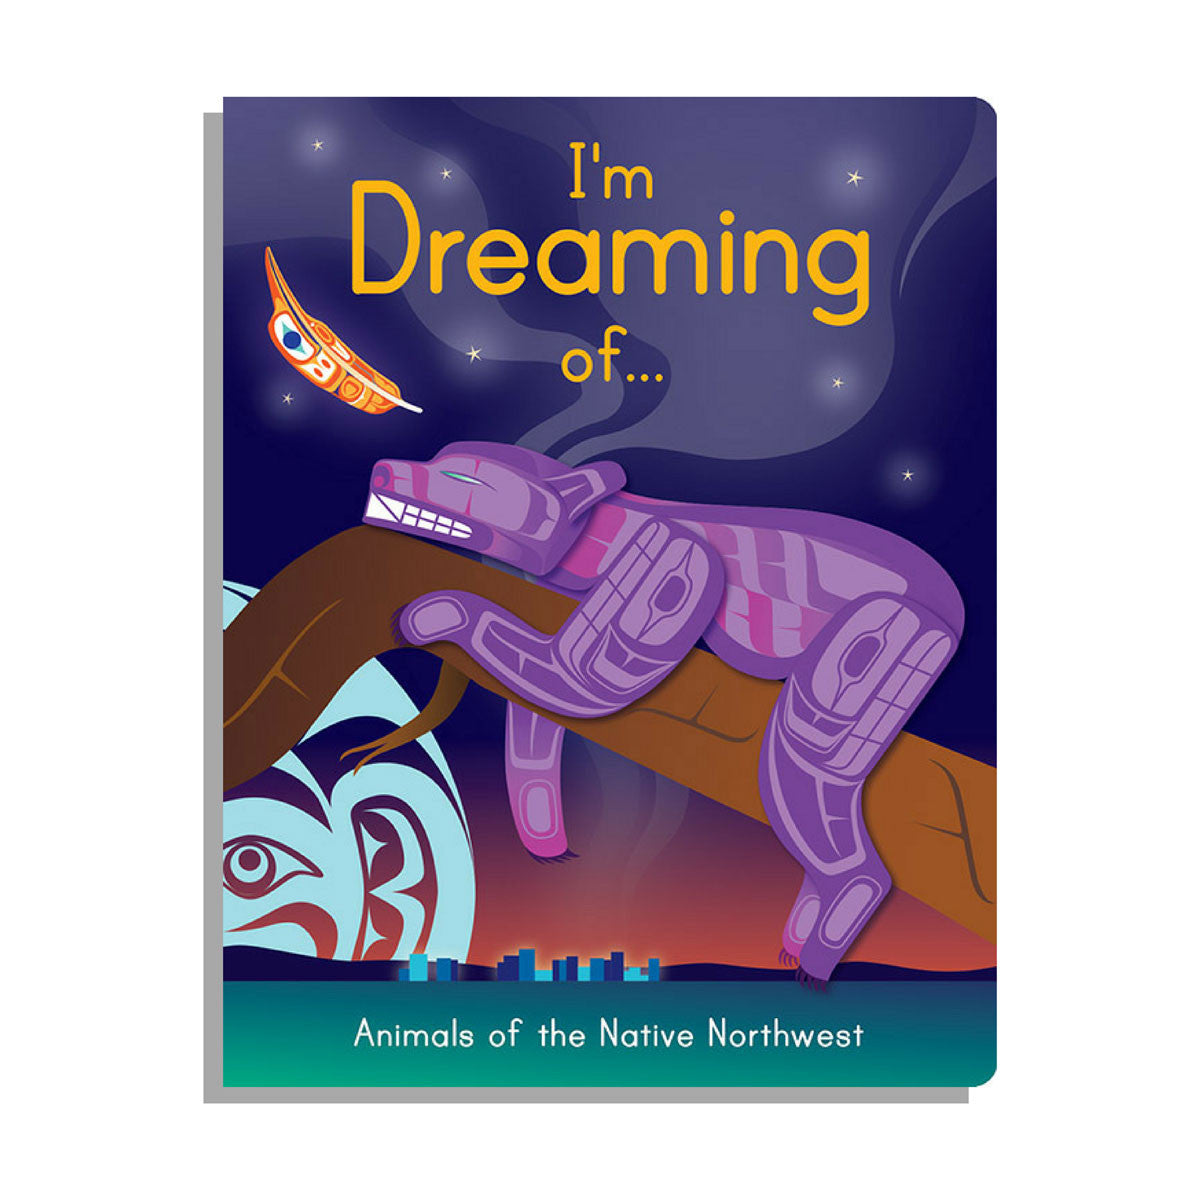 Board Book - I'm Dreaming Of... by Melaney Gleeson-Lyall